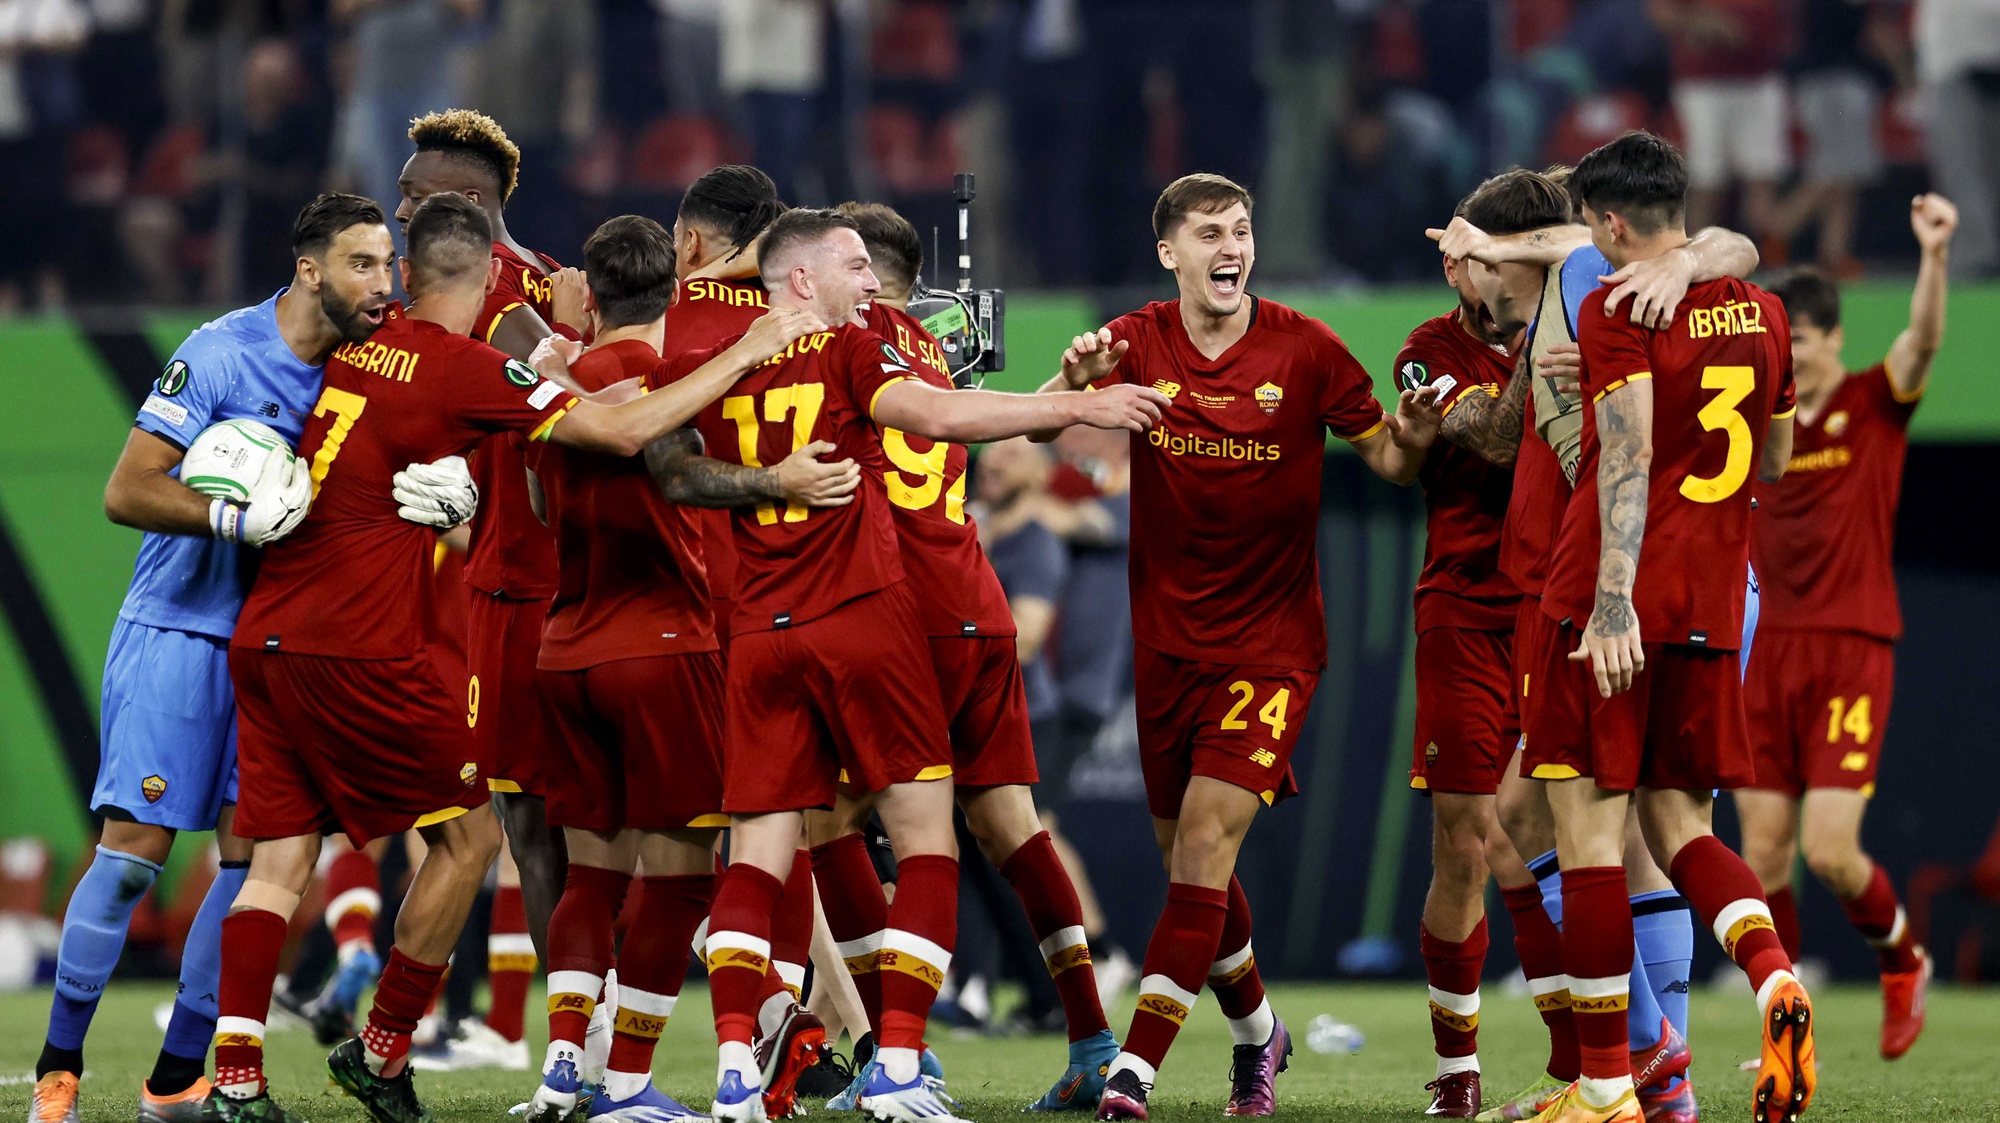 epa09975857 AS Roma players celebrate after winning the UEFA Conference League Final soccer match between AS Roma and Feyenoord at National Arena in Tirana, Albania, 25 May 2022.  EPA/PIETER STAM DE JONGE